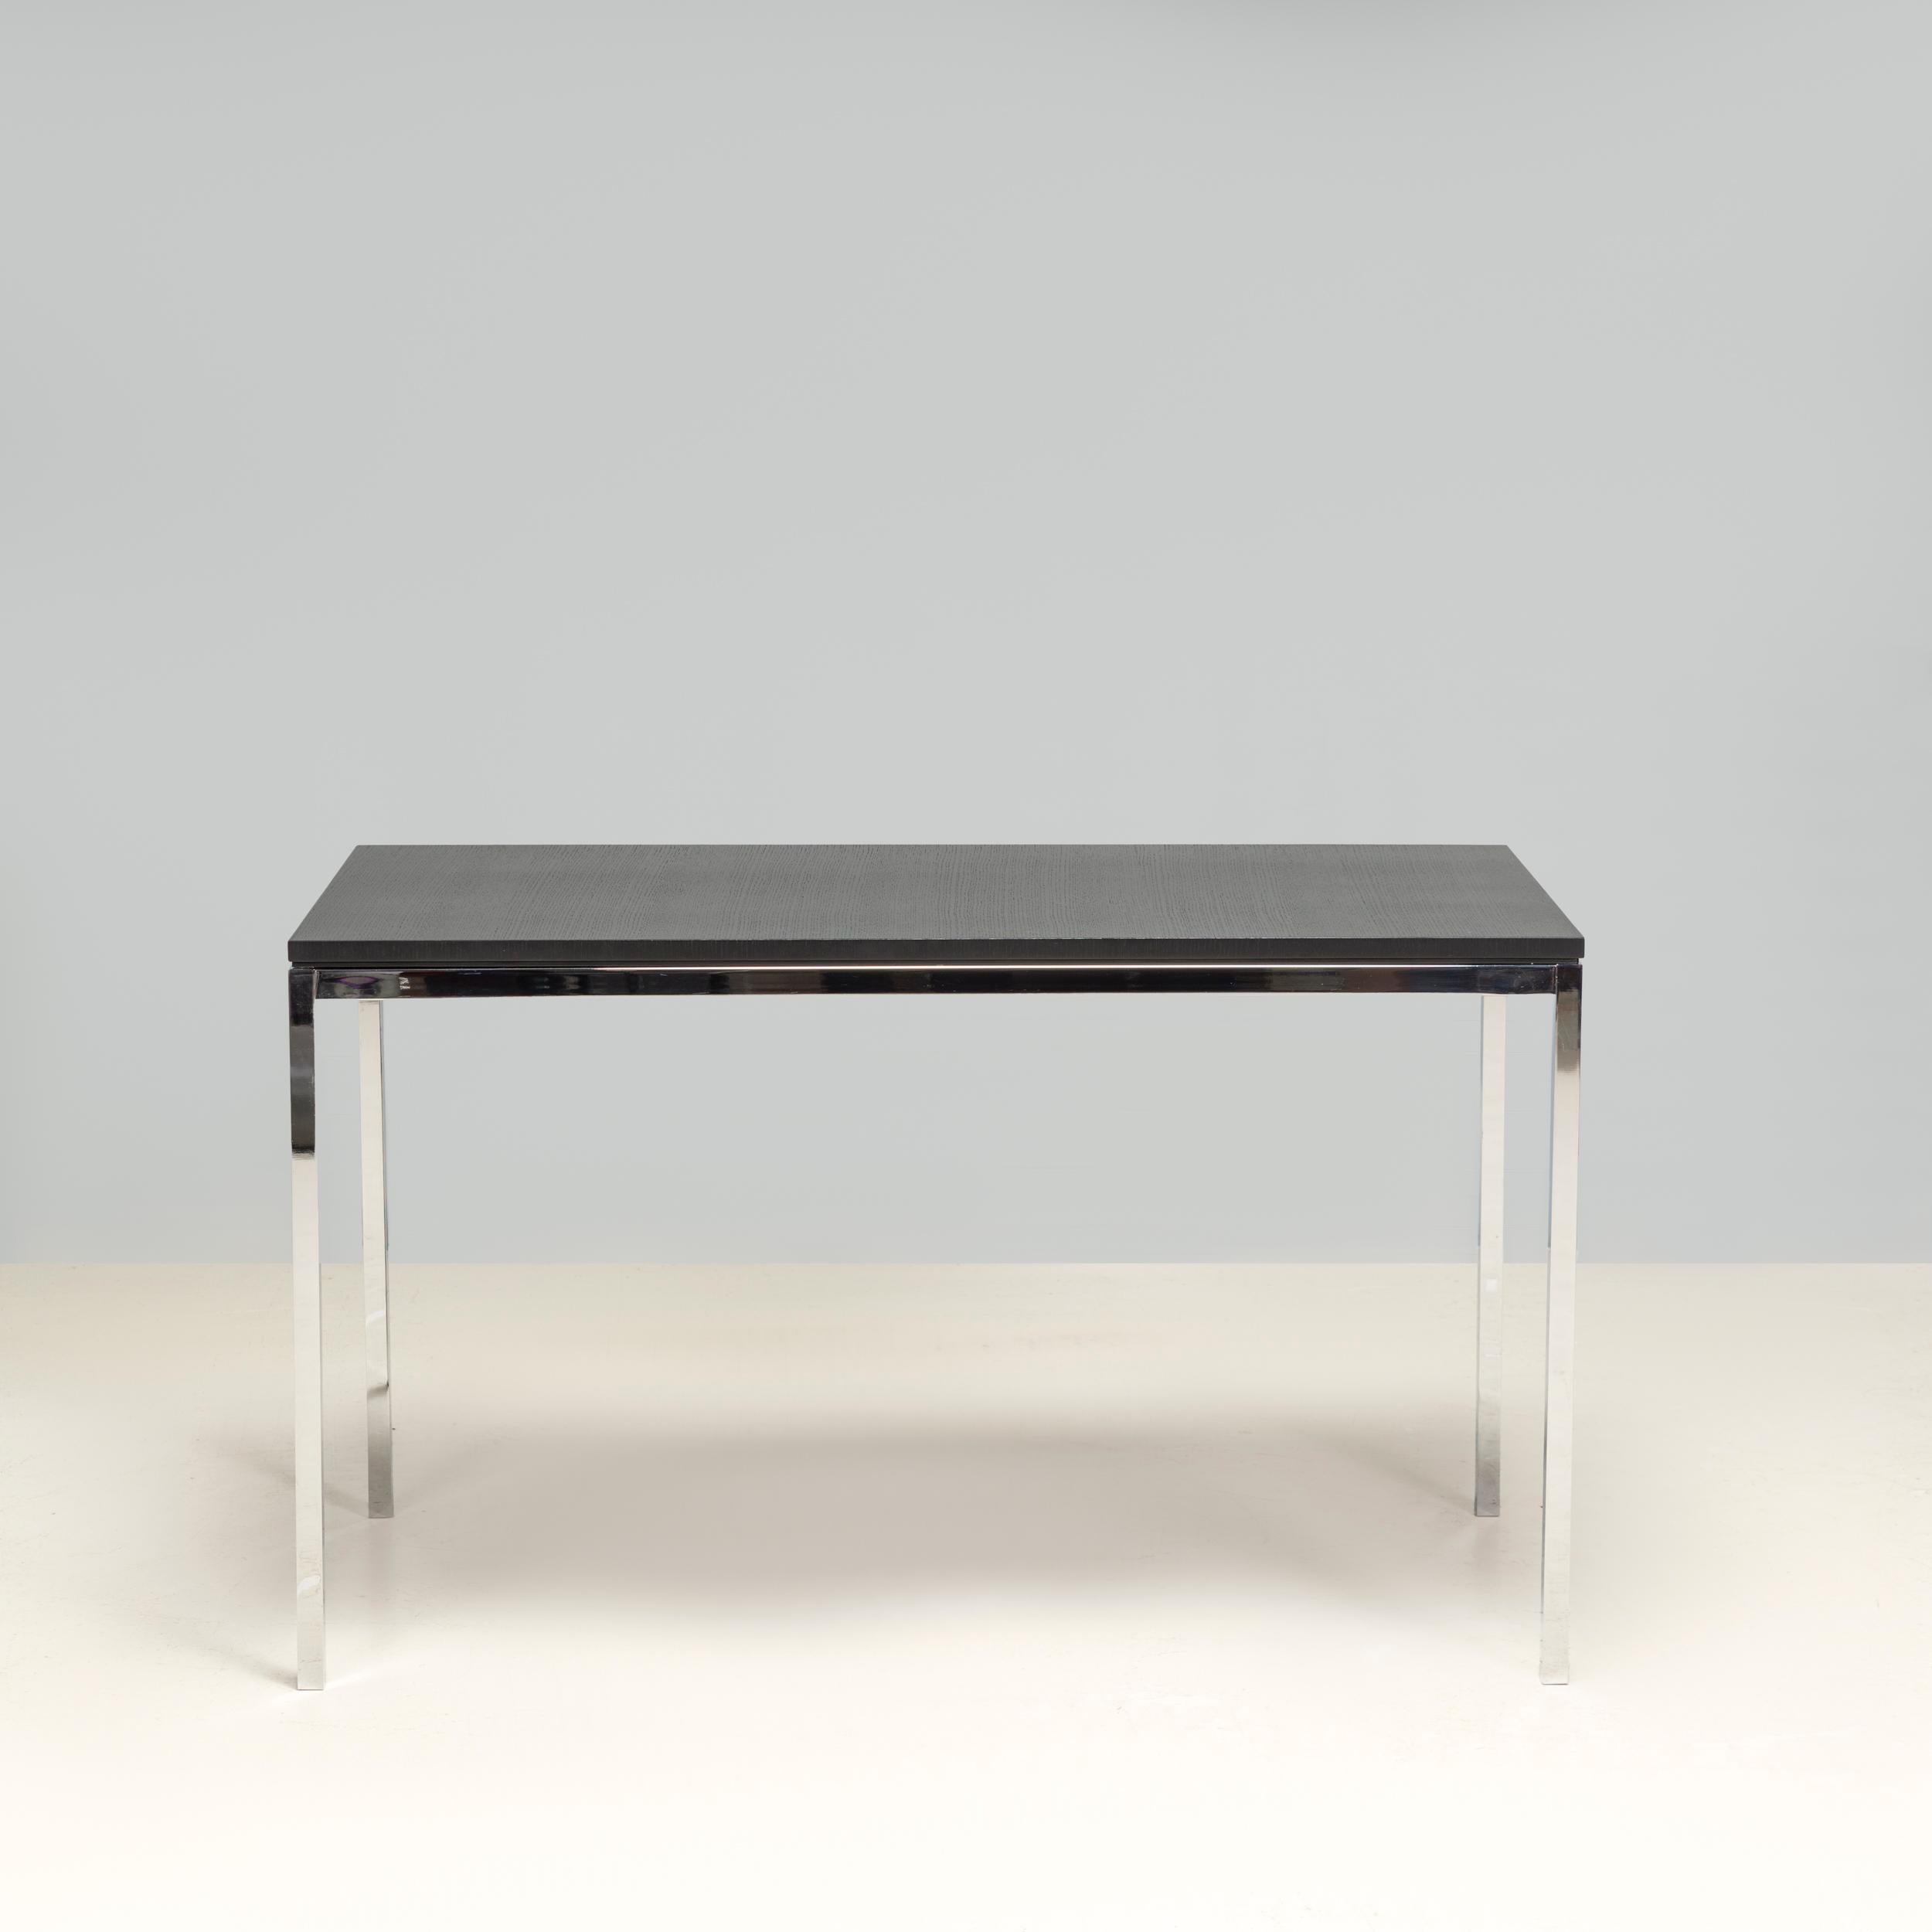 Originally designed by Florence Knoll in 1954, the Mini Desk is part of the High Table range manufactured by Knoll.

Constructed from a slimline polished chrome frame, the desk has an ebonised oak veneer tabletop.

Sleek and sophisticated, the